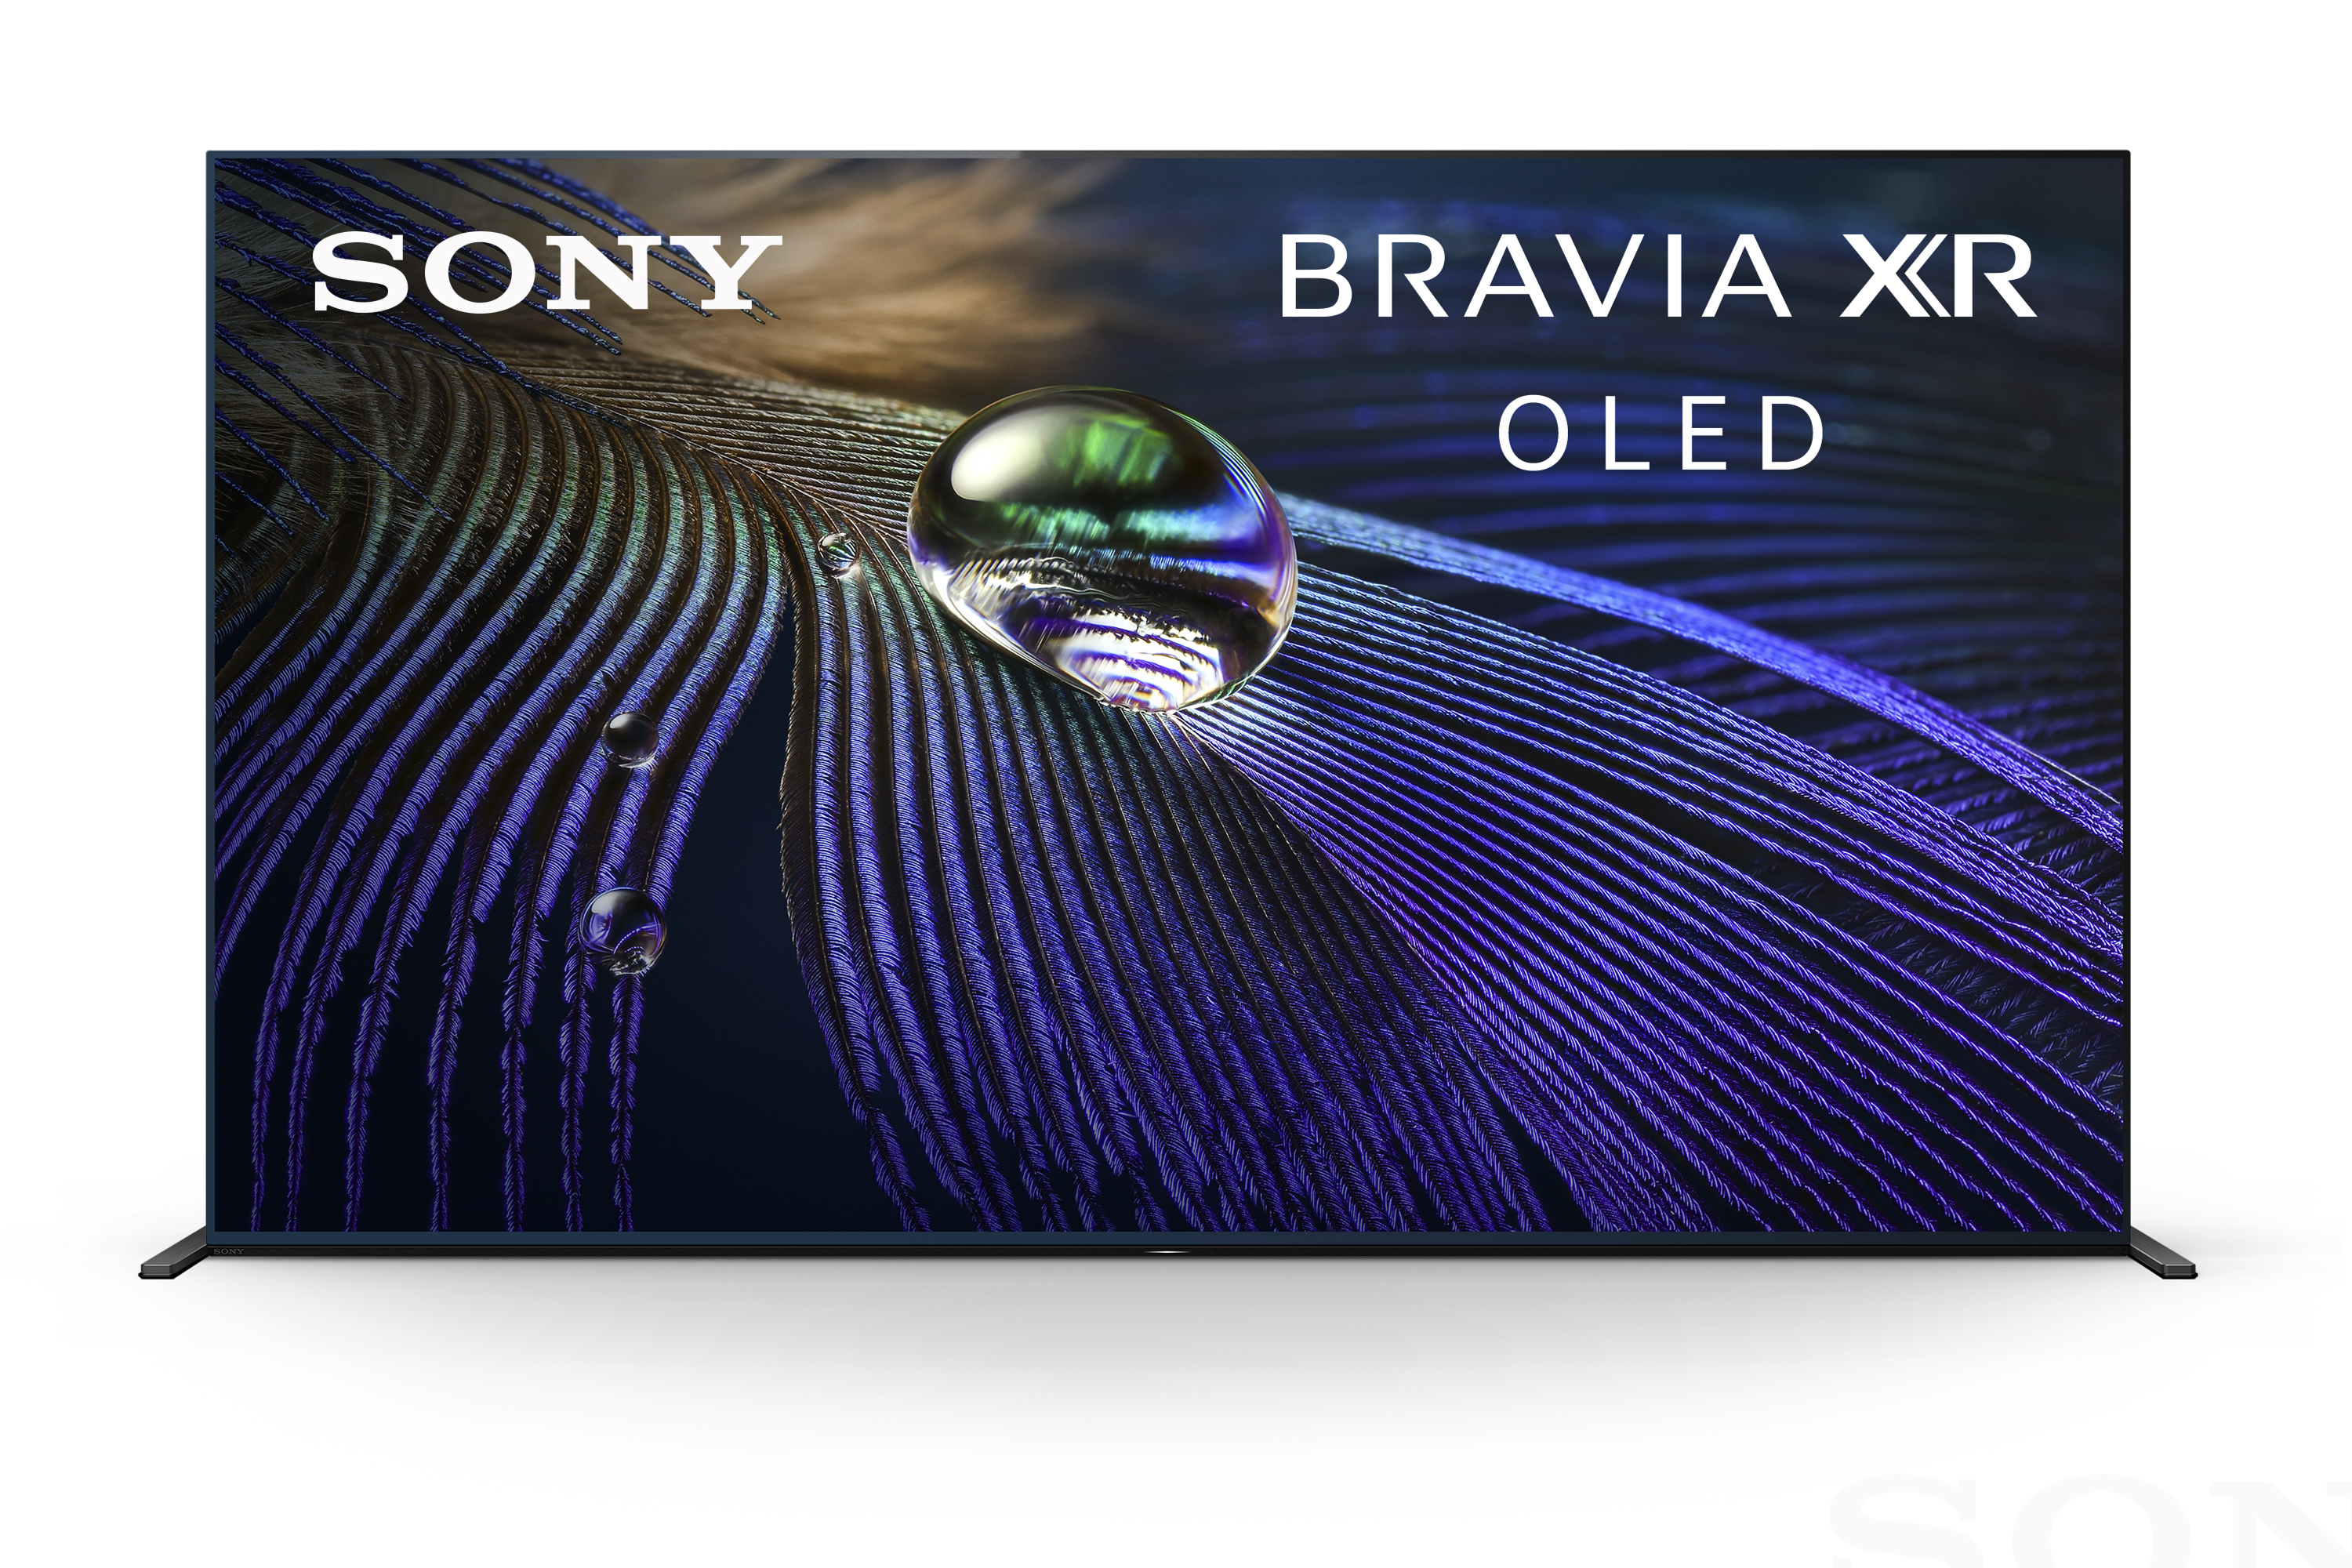 Sony XR55A90J 55" A90J Series BRAVIA XR OLED 4K UHD Smart TV with Dolby Vision HDR (2021) - image 1 of 21